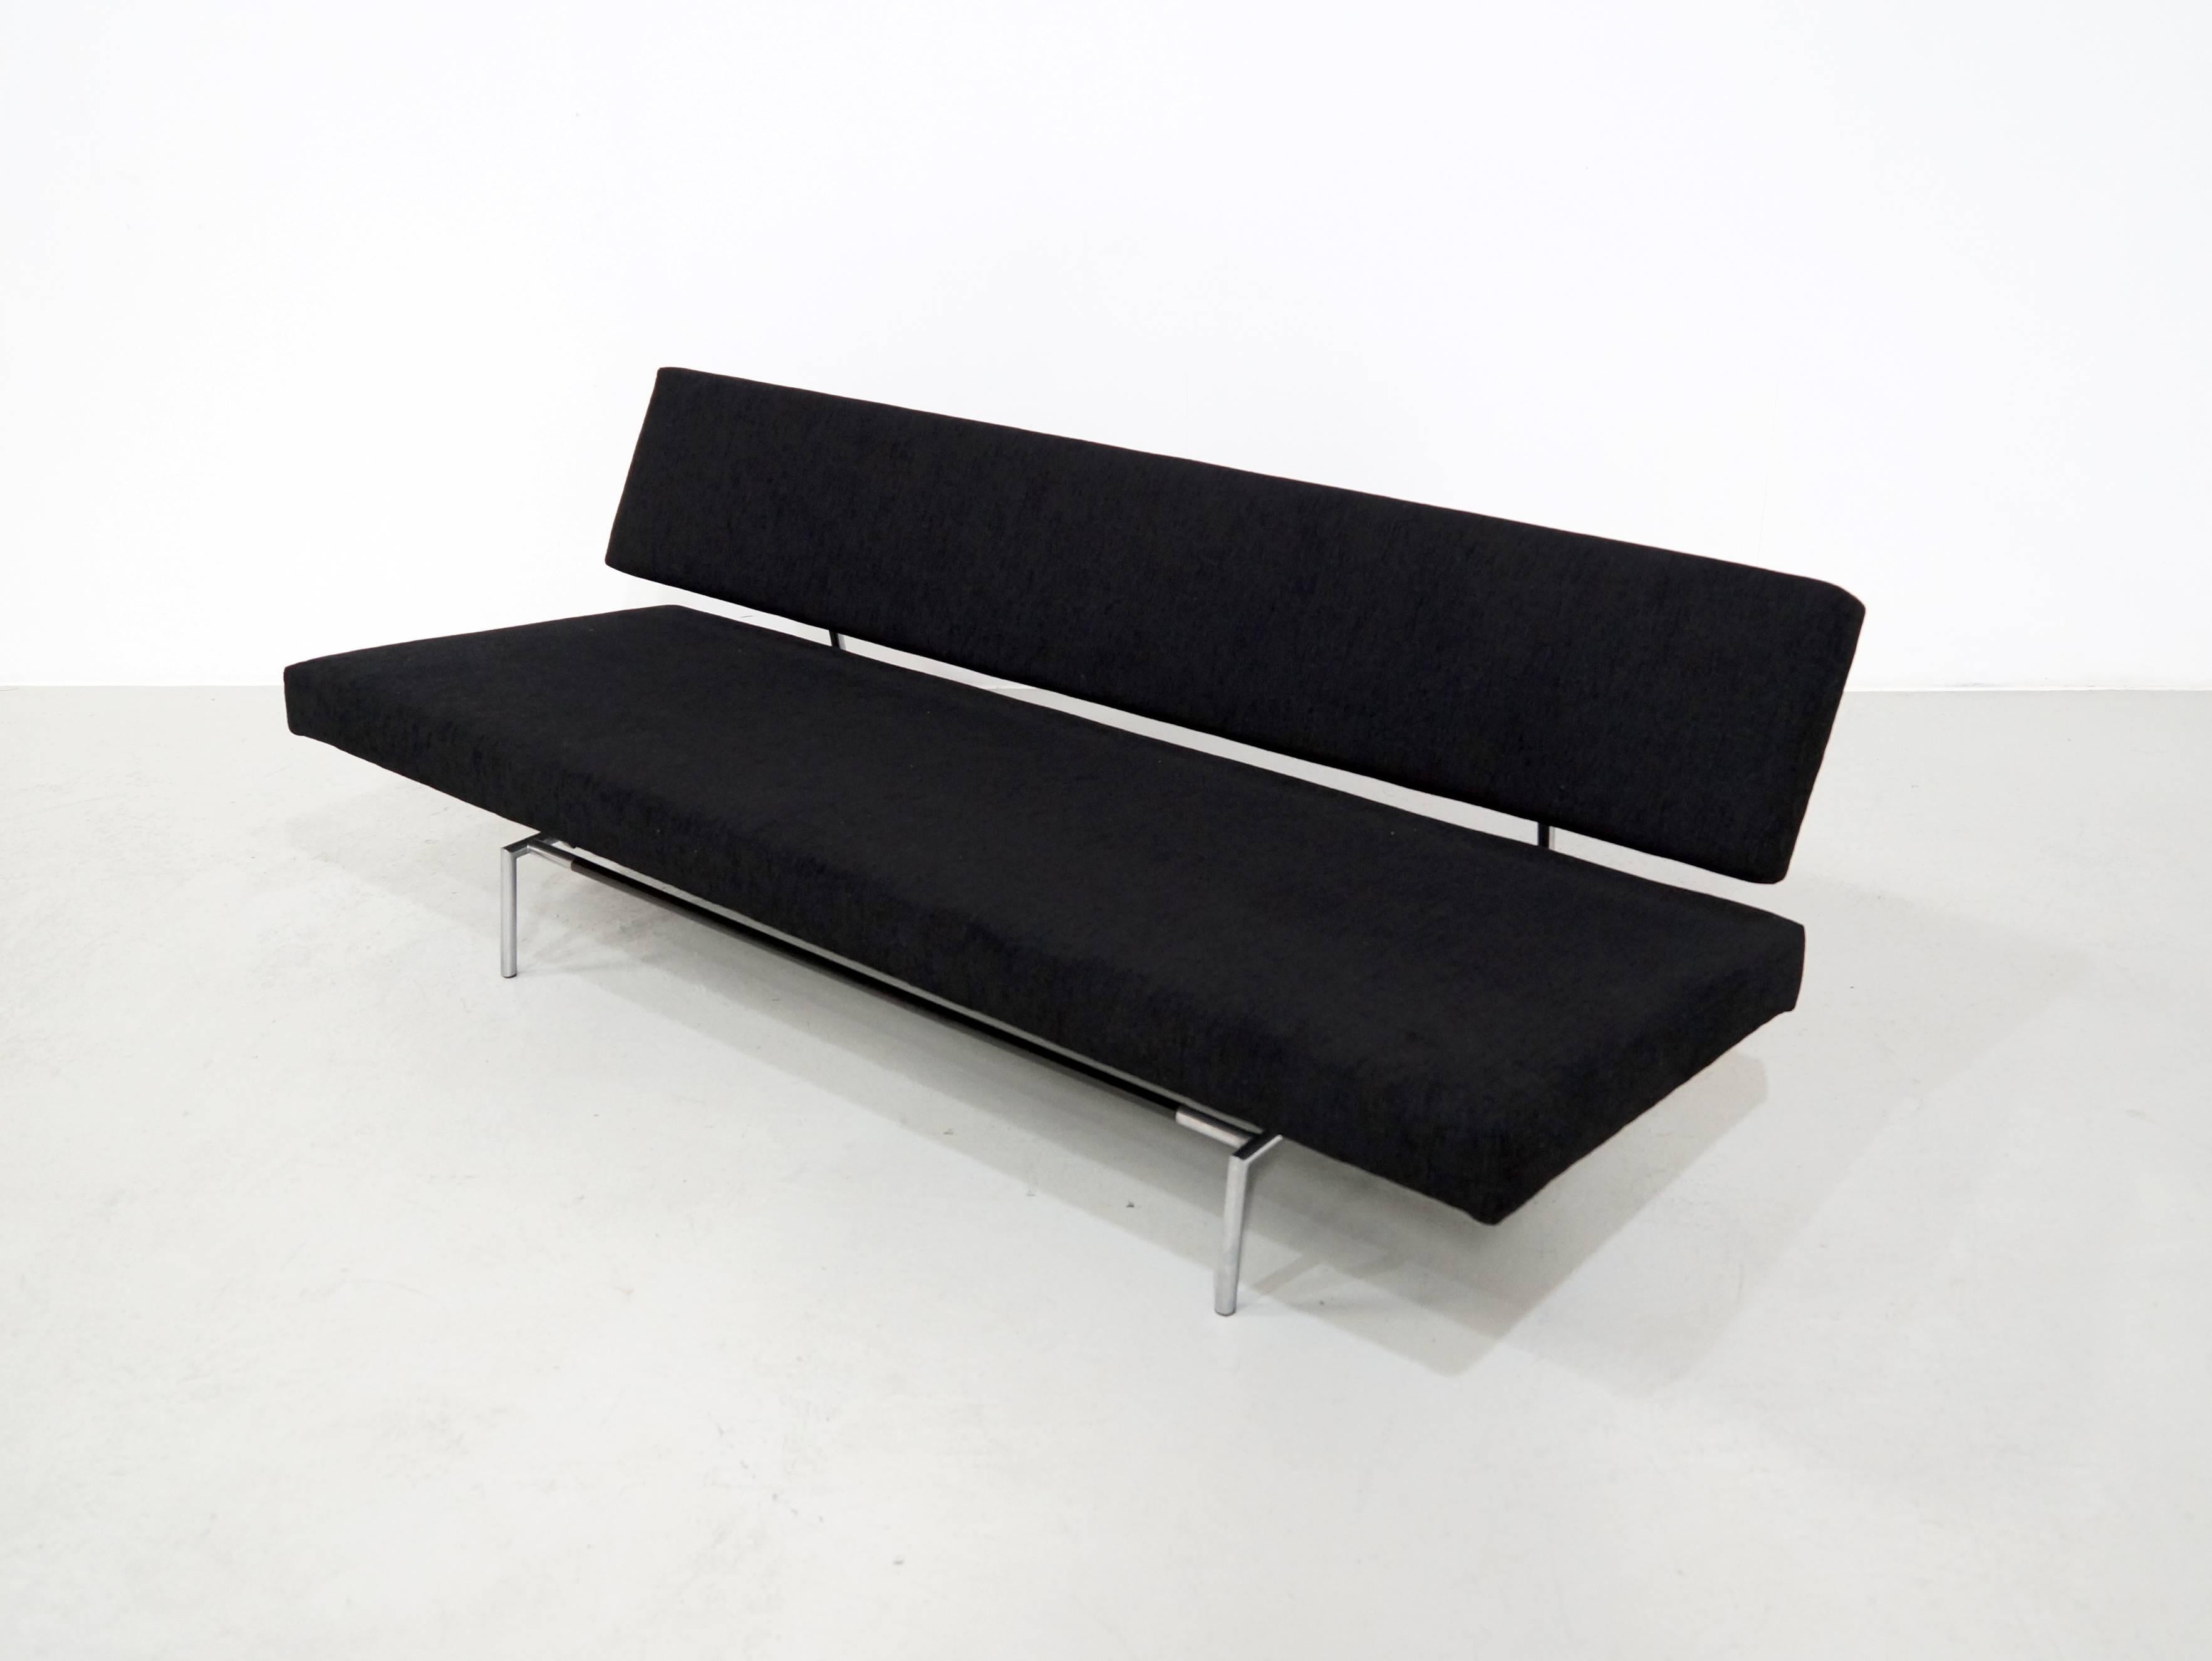 Mid-20th Century Black and Stainless Steel Daybed, Sofa by Martin Visser for Spectrum, 1958